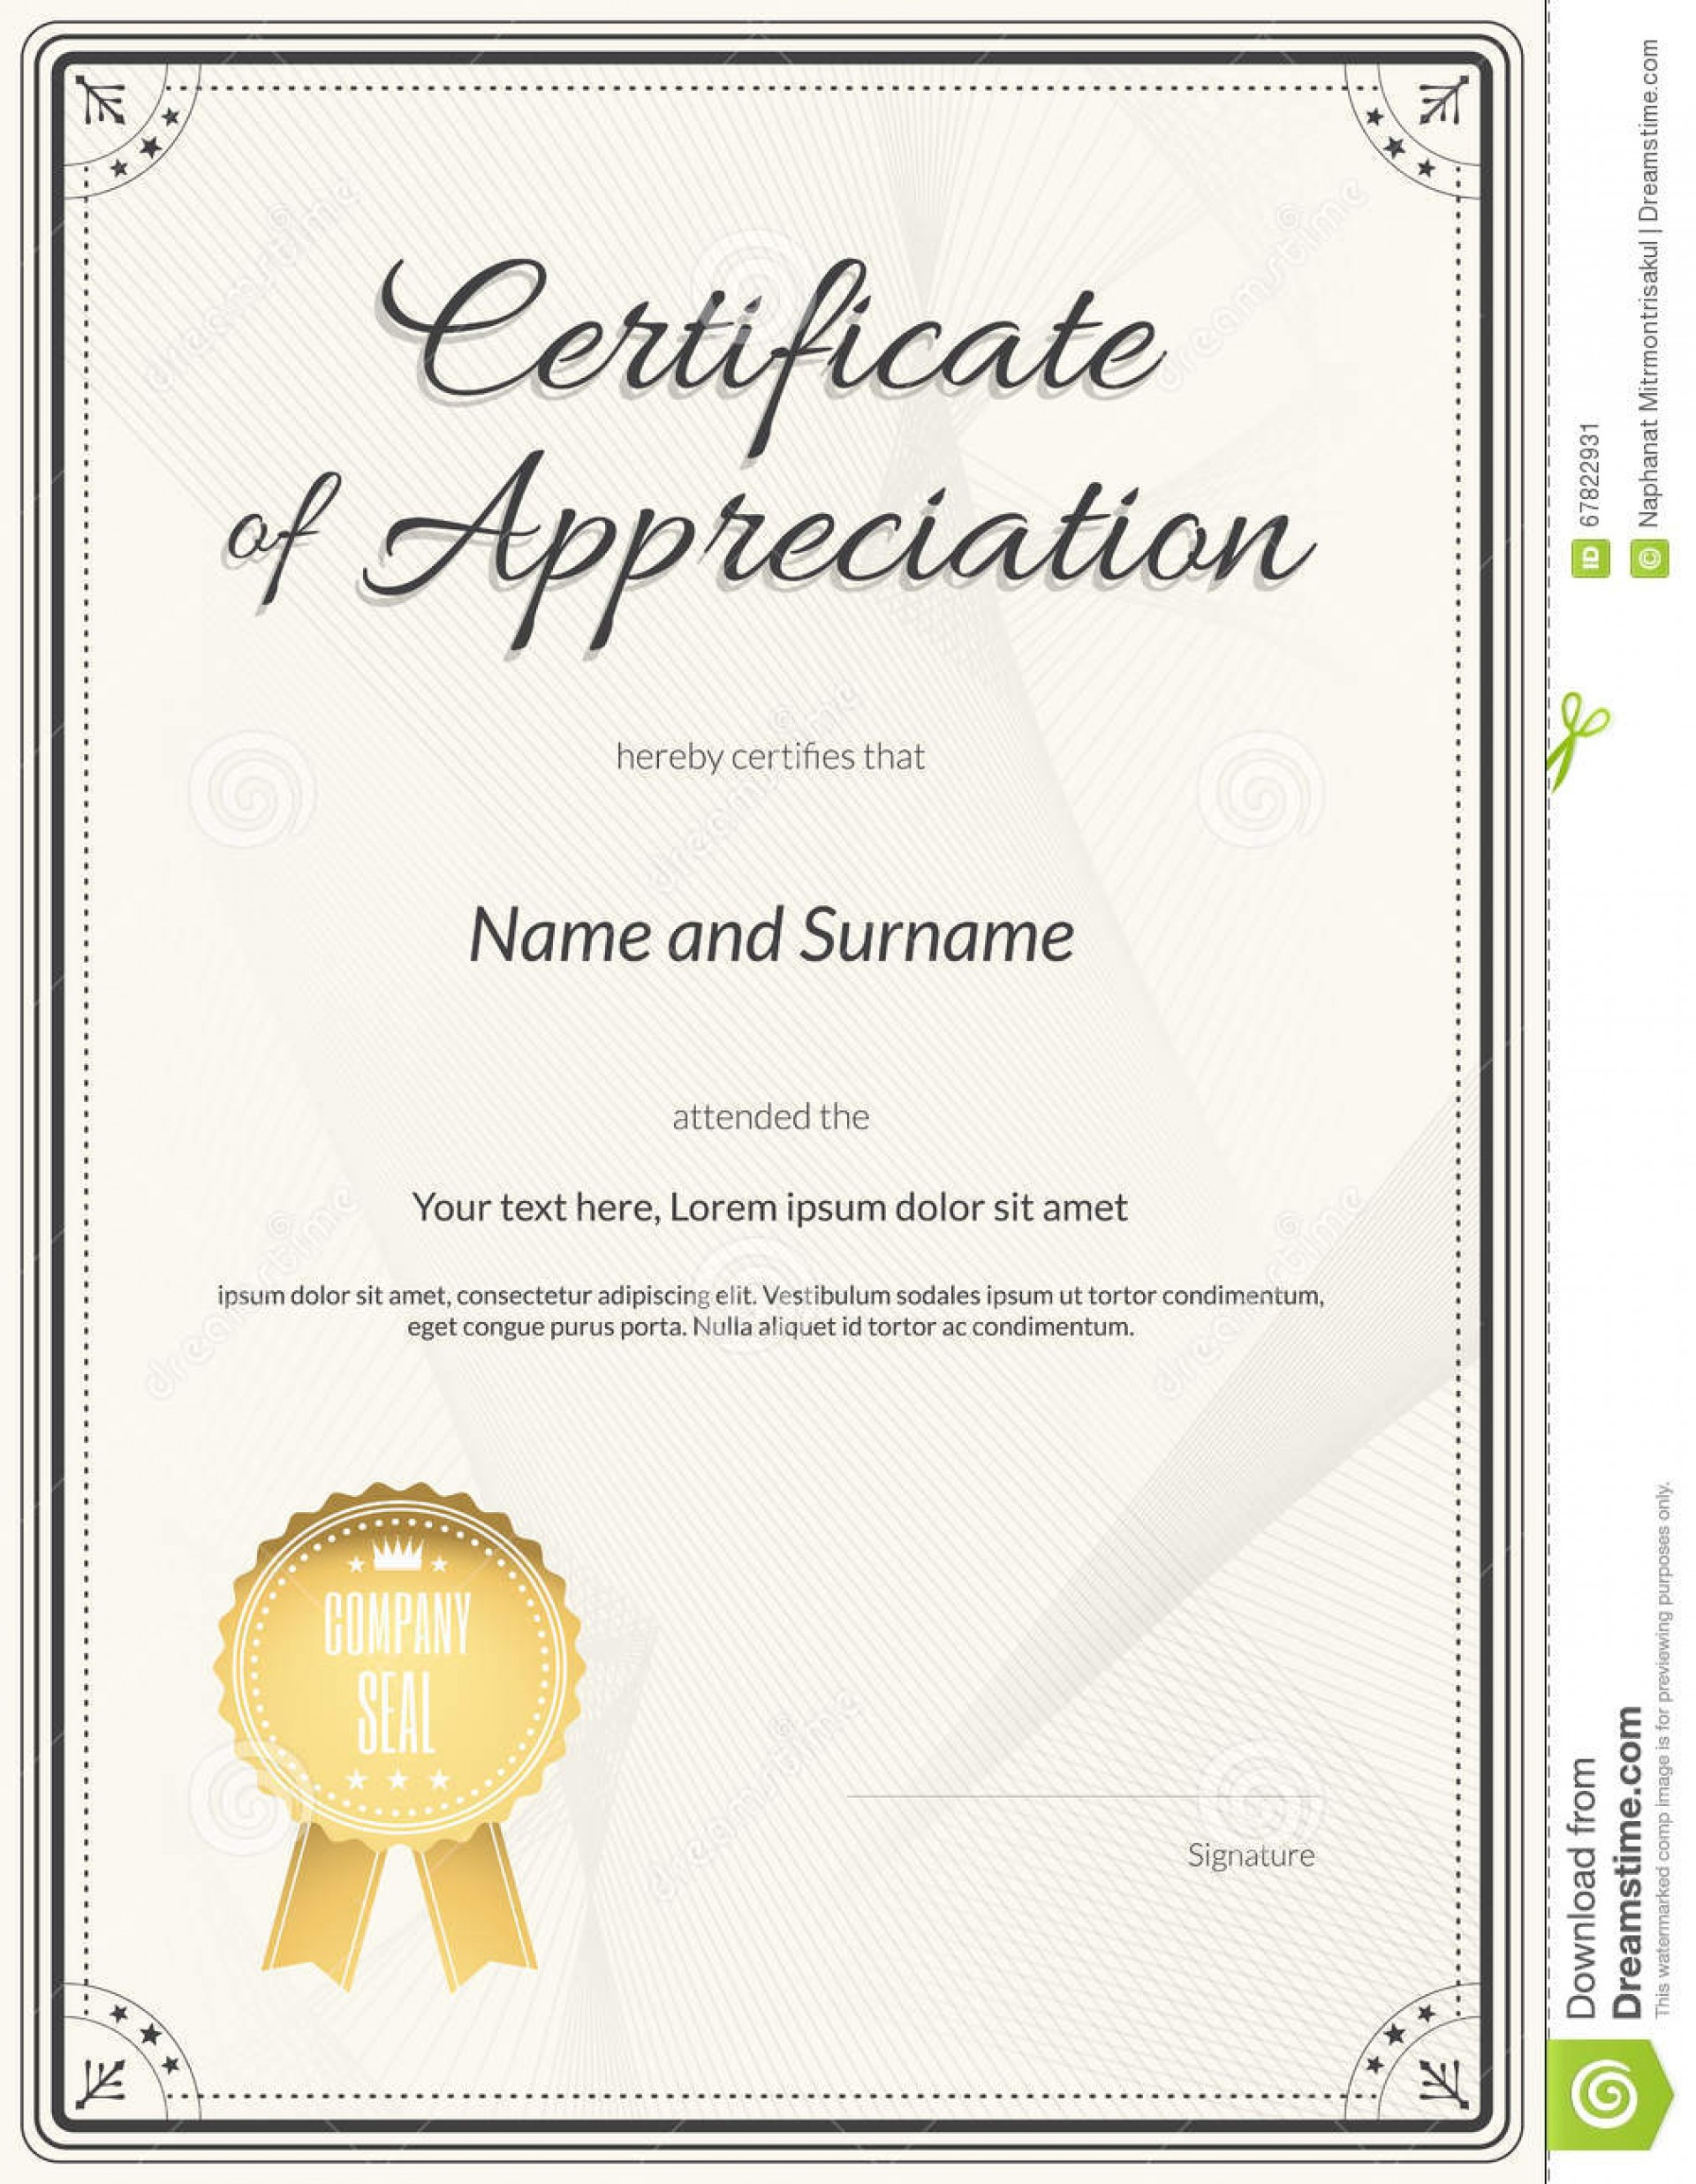 Army Certificate Of Appreciation Template Ppt Pertaining To Army Certificate Of Appreciation Template